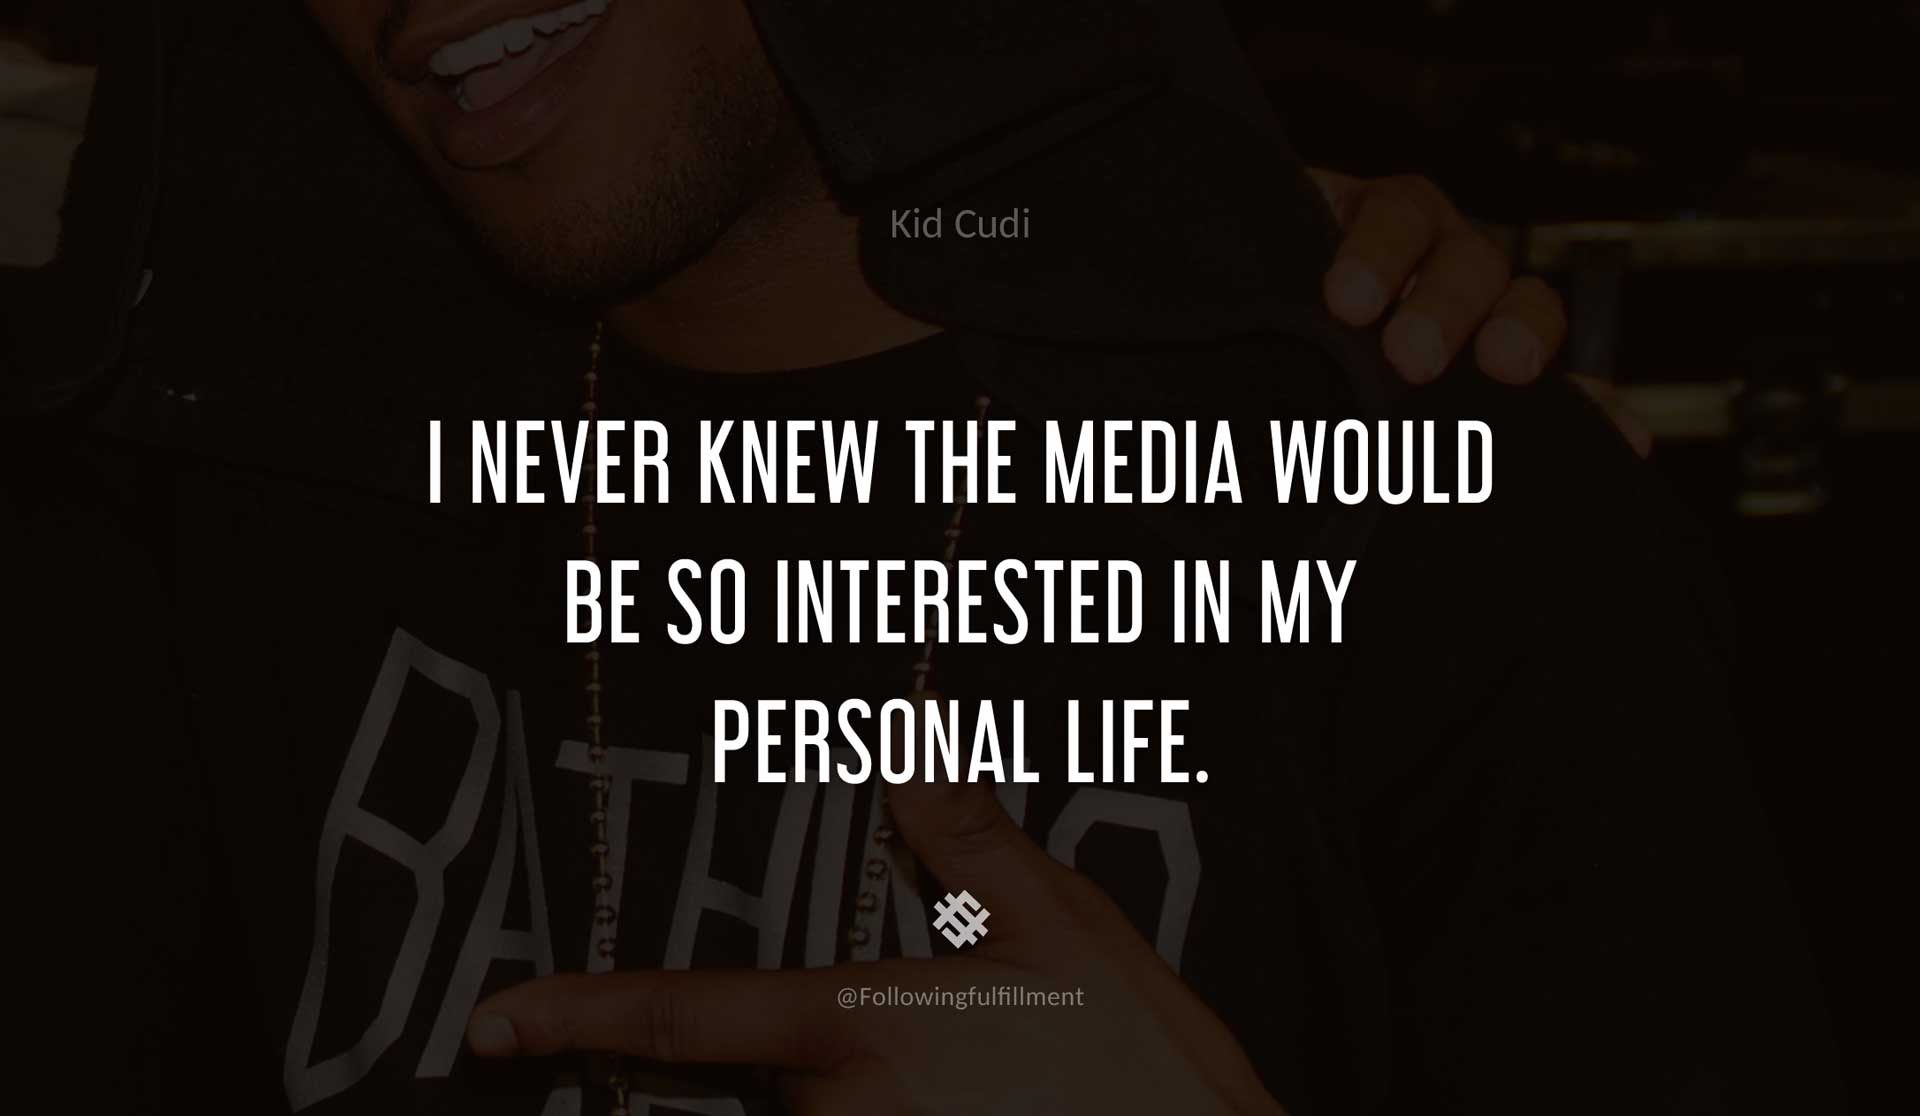 I-never-knew-the-media-would-be-so-interested-in-my-personal-life.-KID-CUDI-Quote.jpg